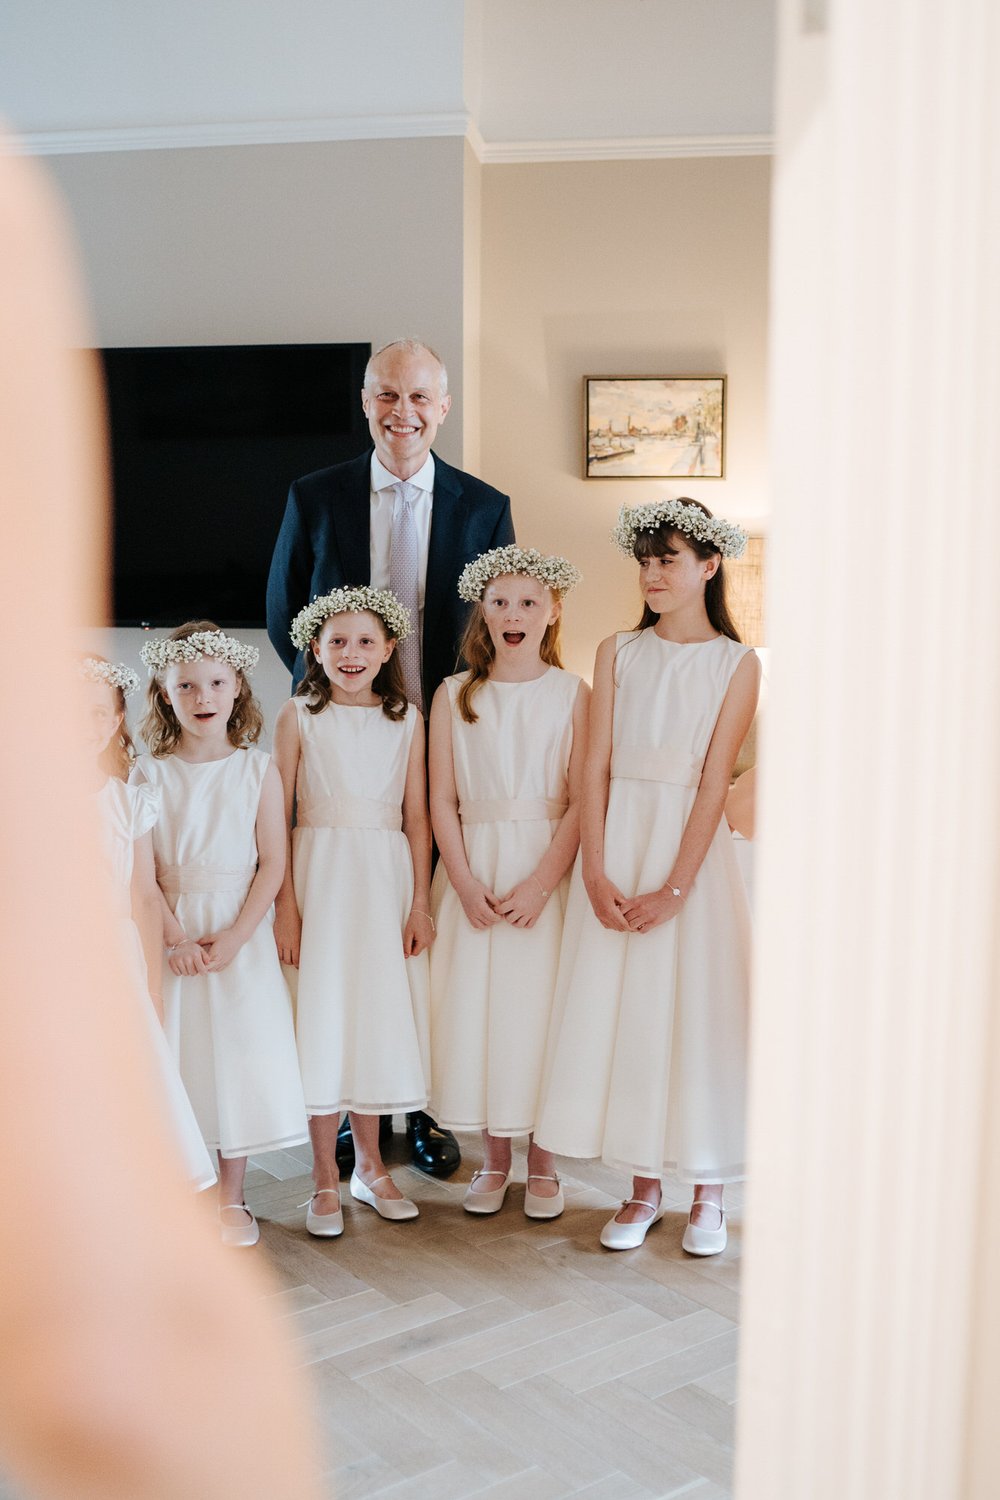 Five little bridesmaids and bride's brother see her in her wedding dress for the first time and cannot contain their joy and excitement